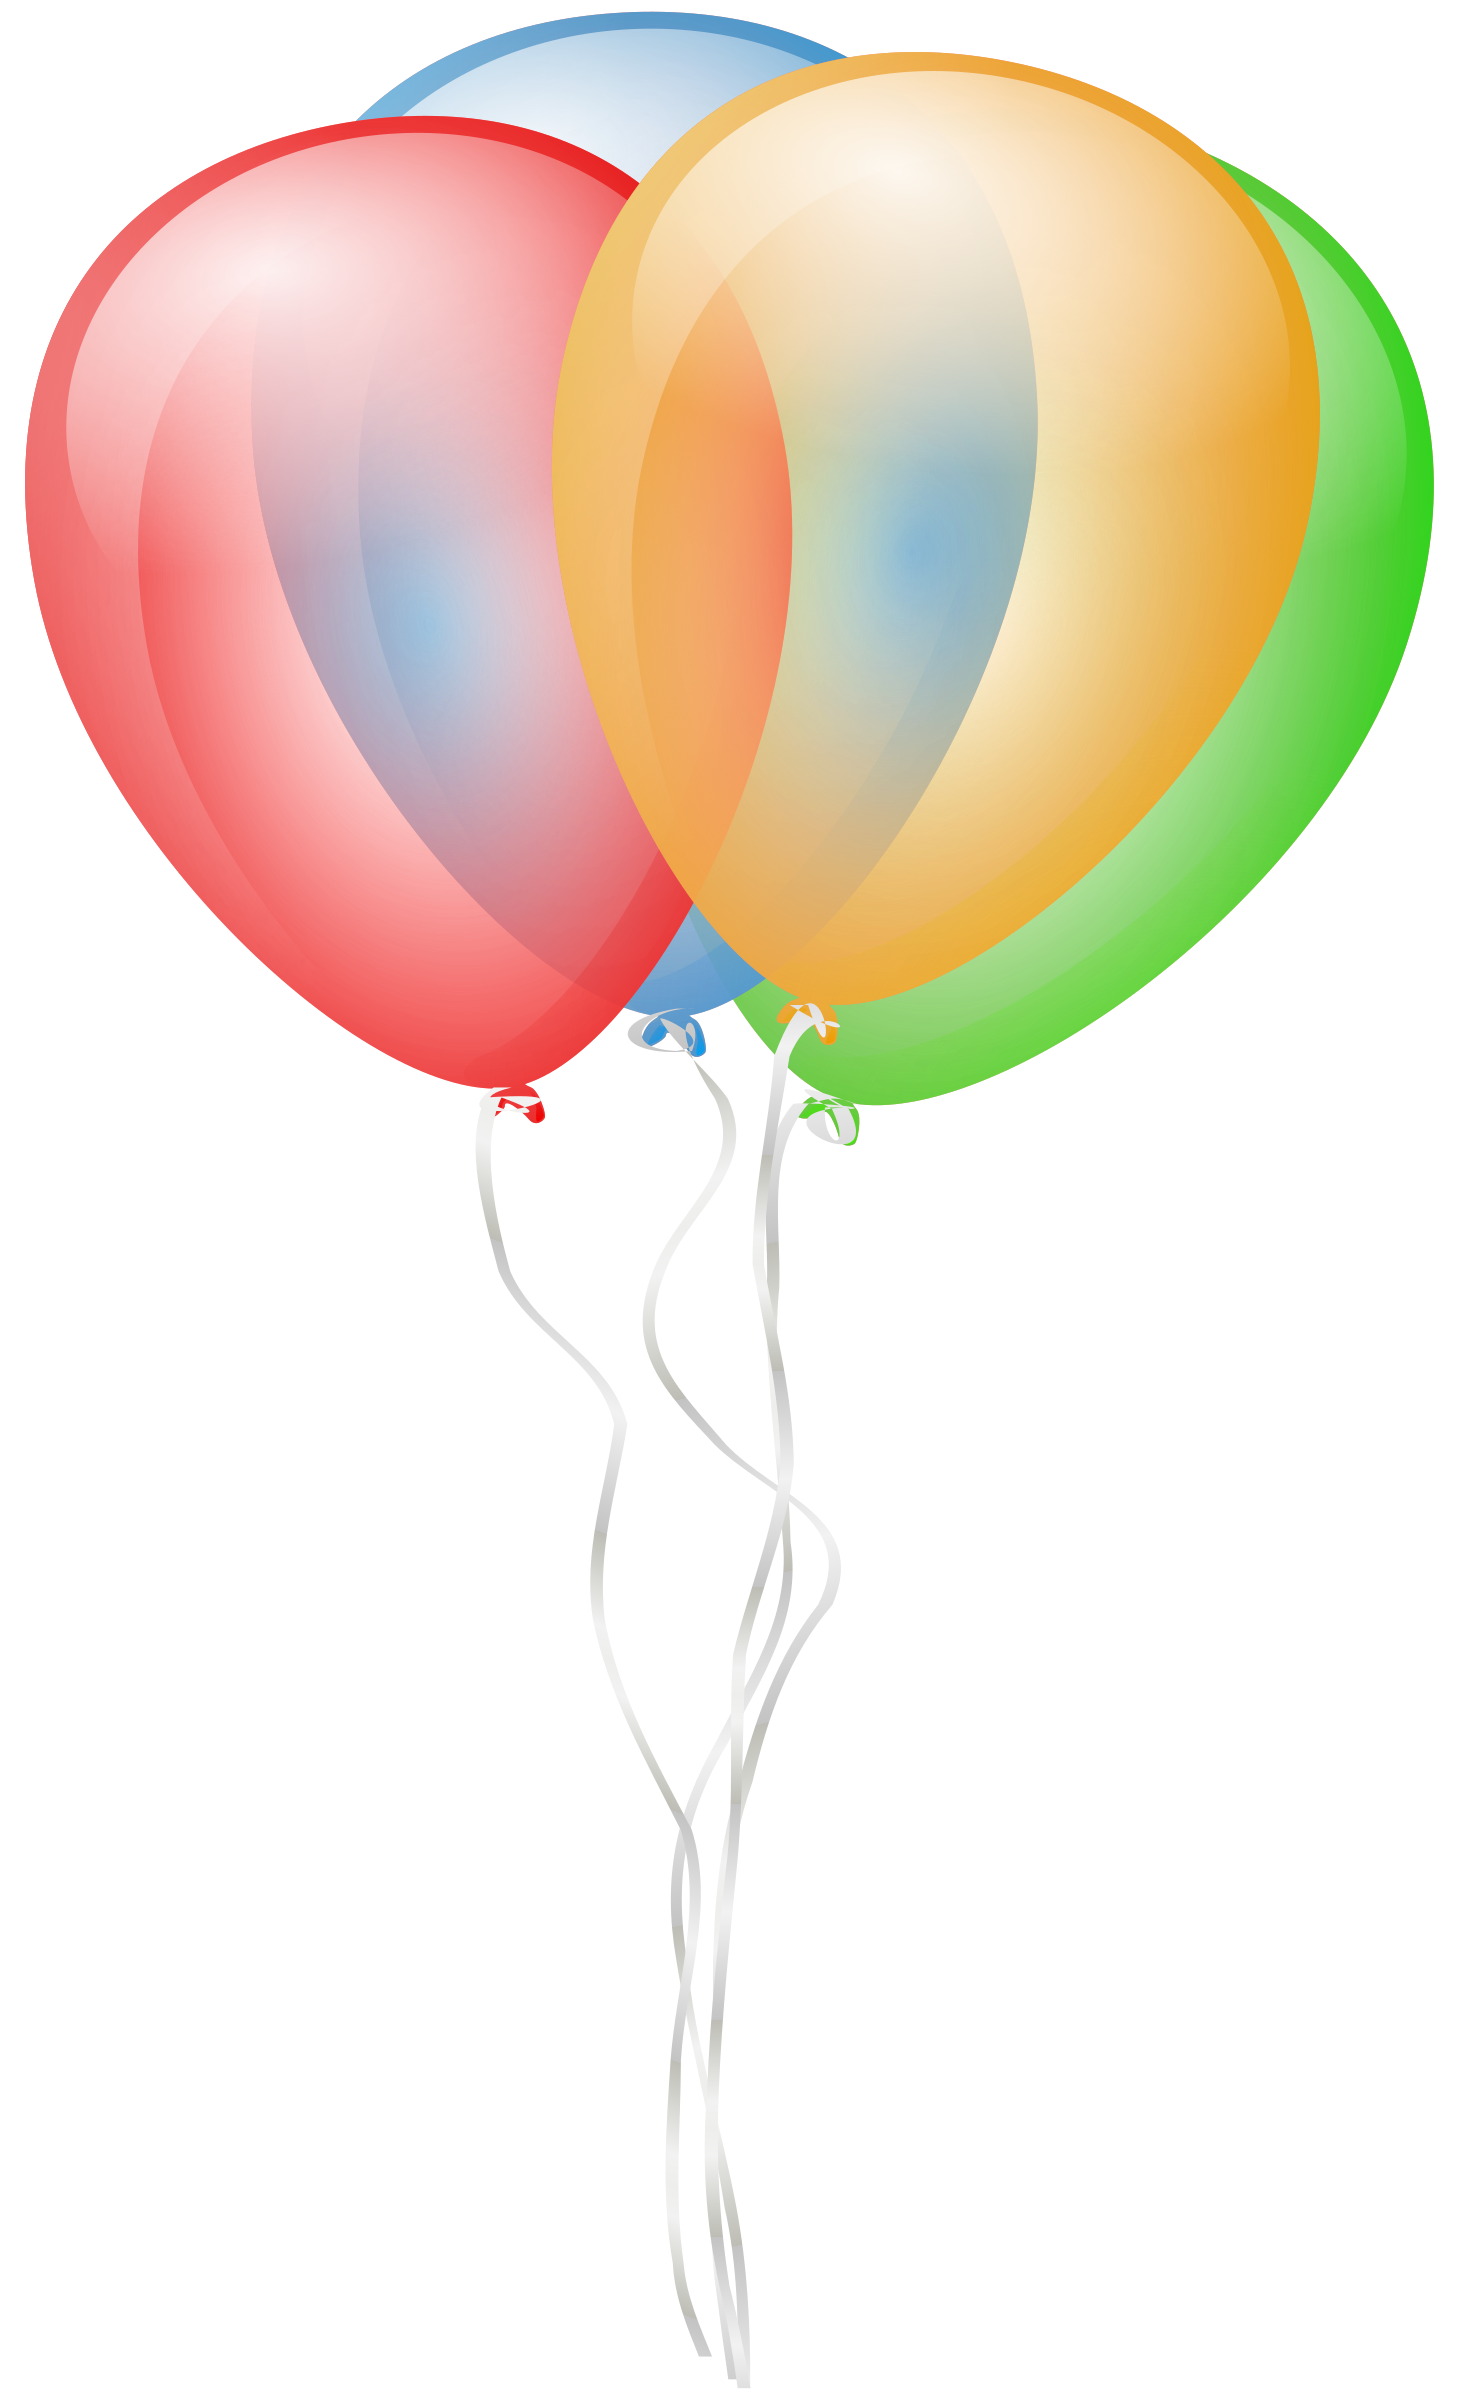 Big image png. Clipart balloons four